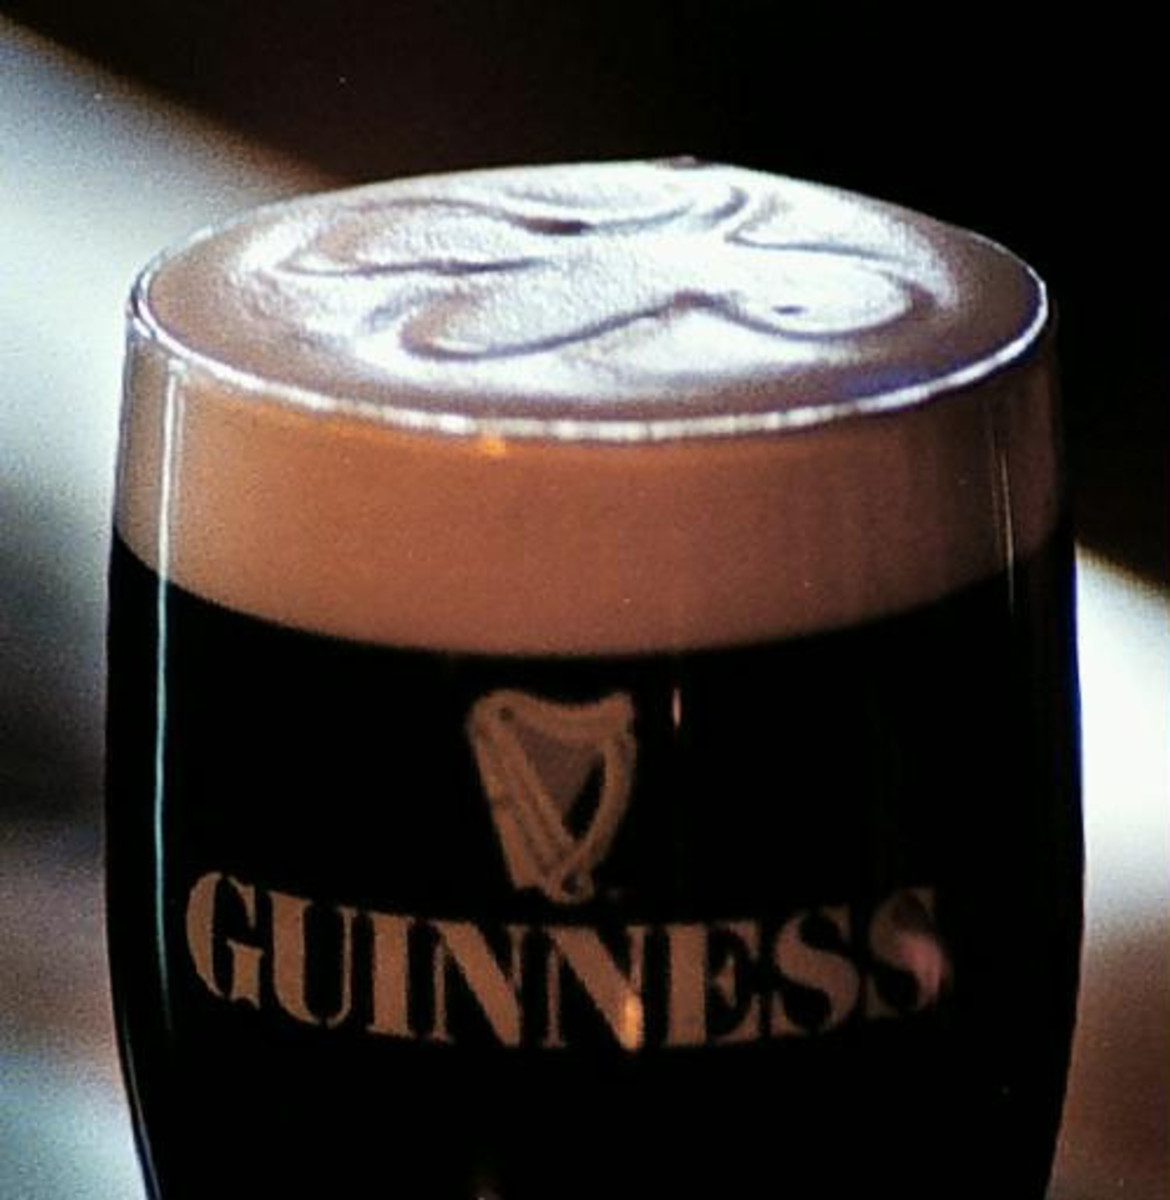 Best Irish Beers and Alcoholic Drinks available in the USA